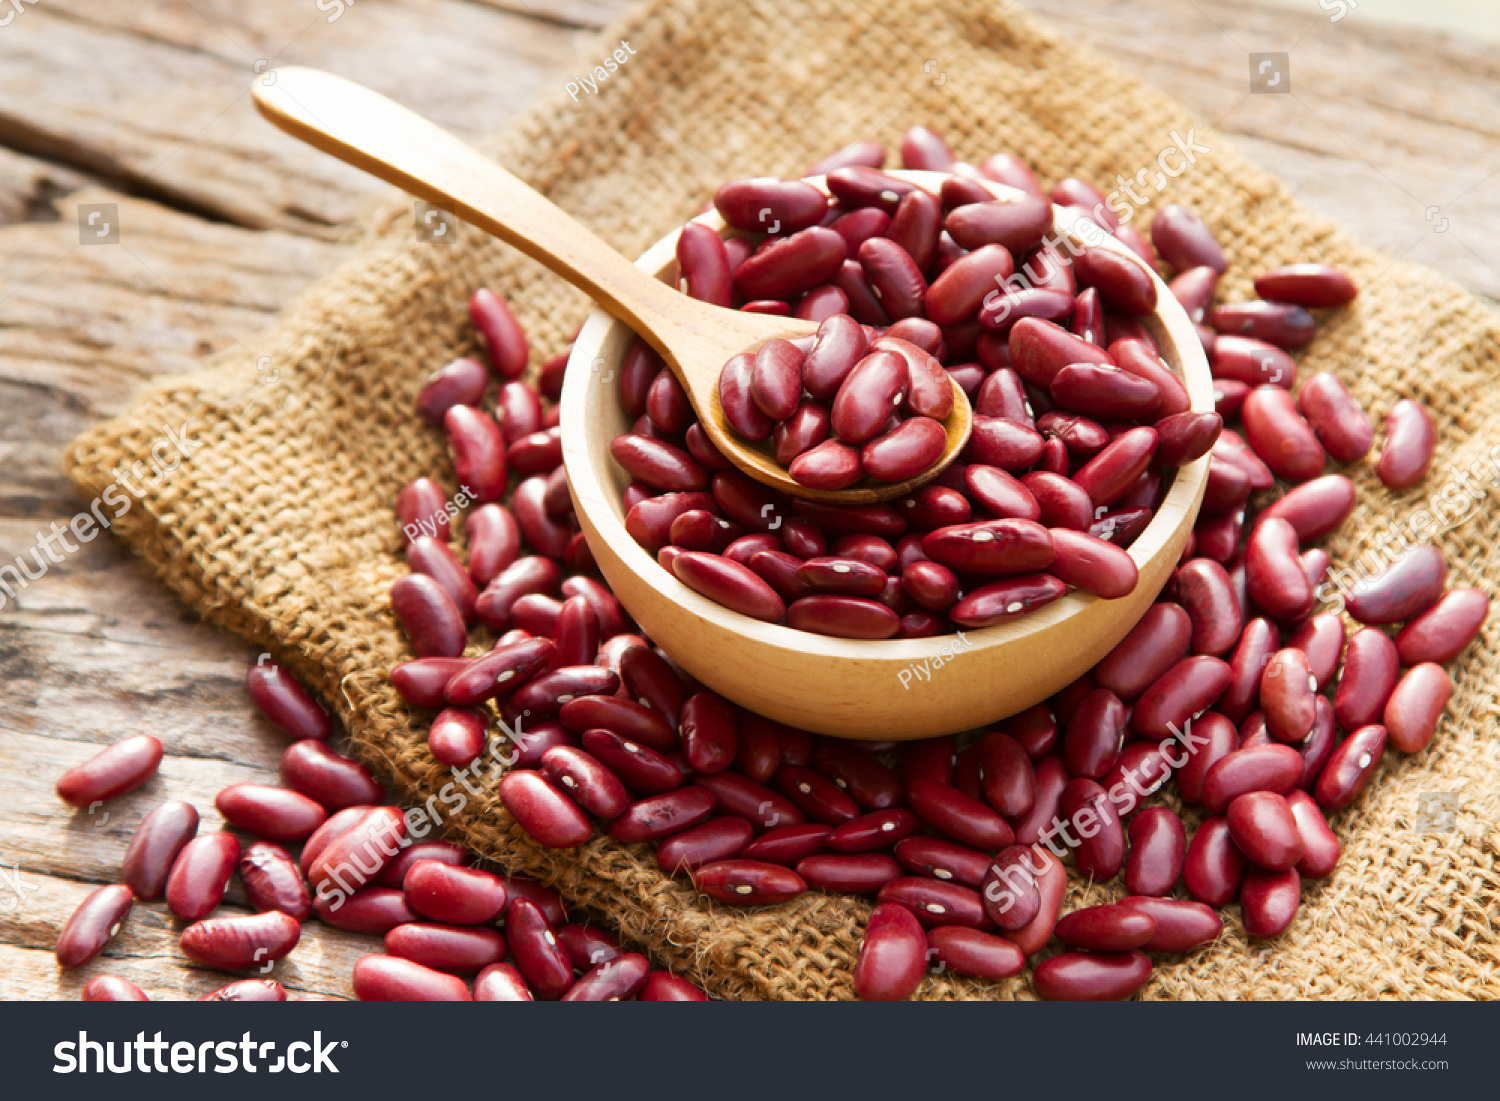 Grains Red bean in wooden bowl and spoon putting on linen and wood background #441002944